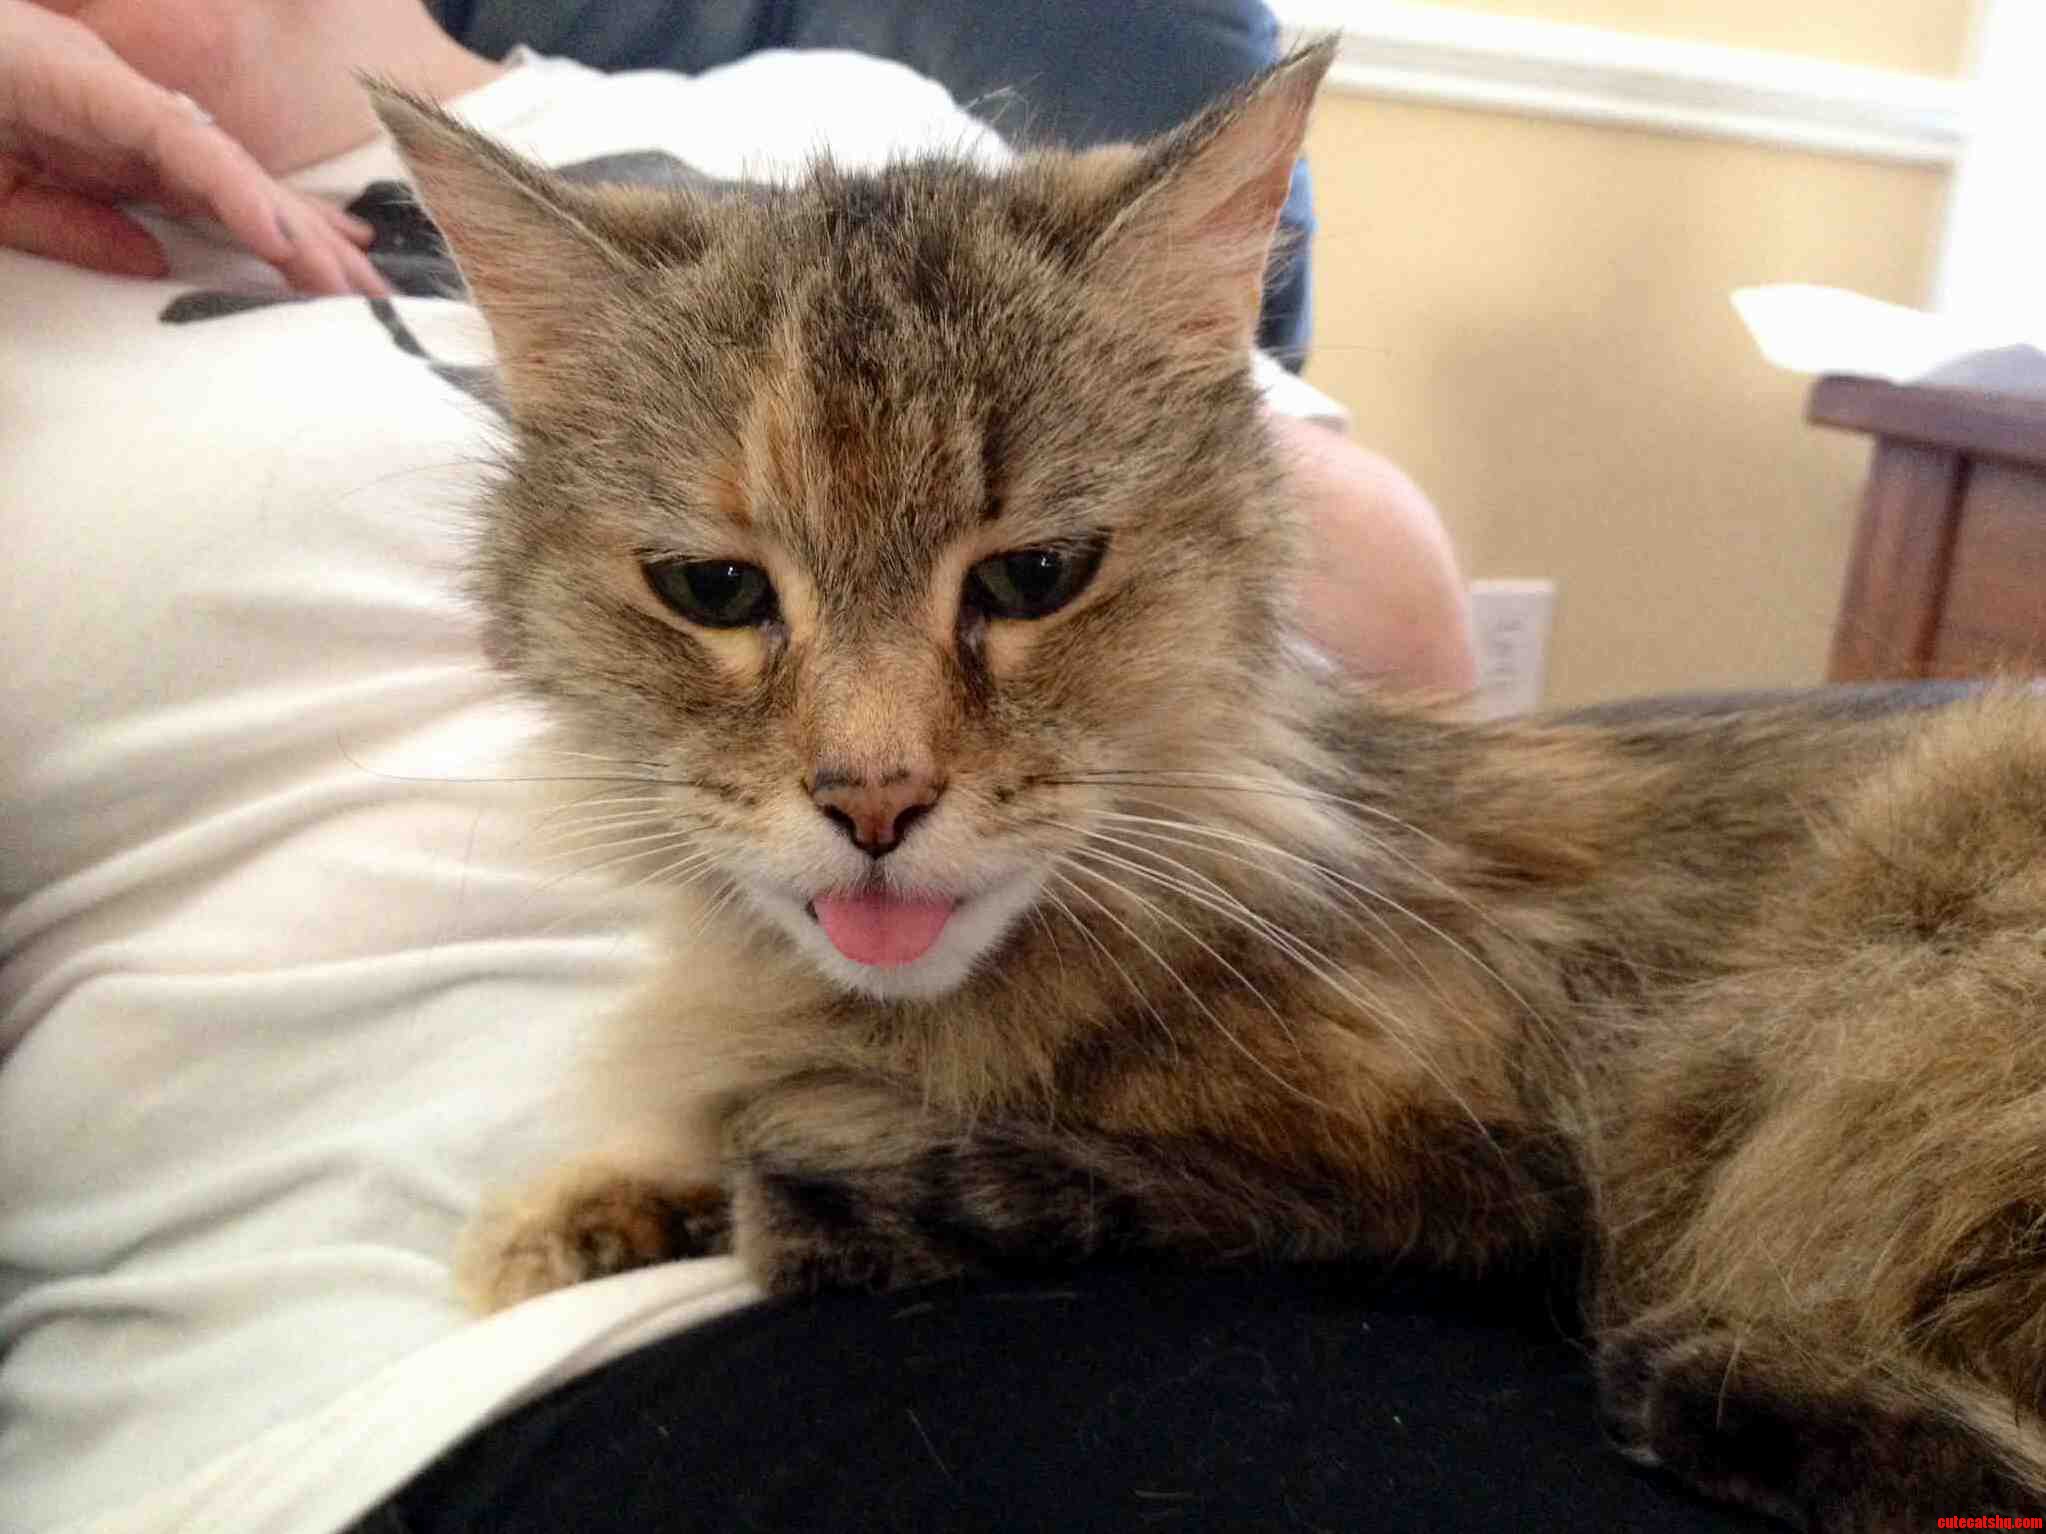 Frances whom i got when i was 13 years old im now 34 enjoys a good blep every now and then.